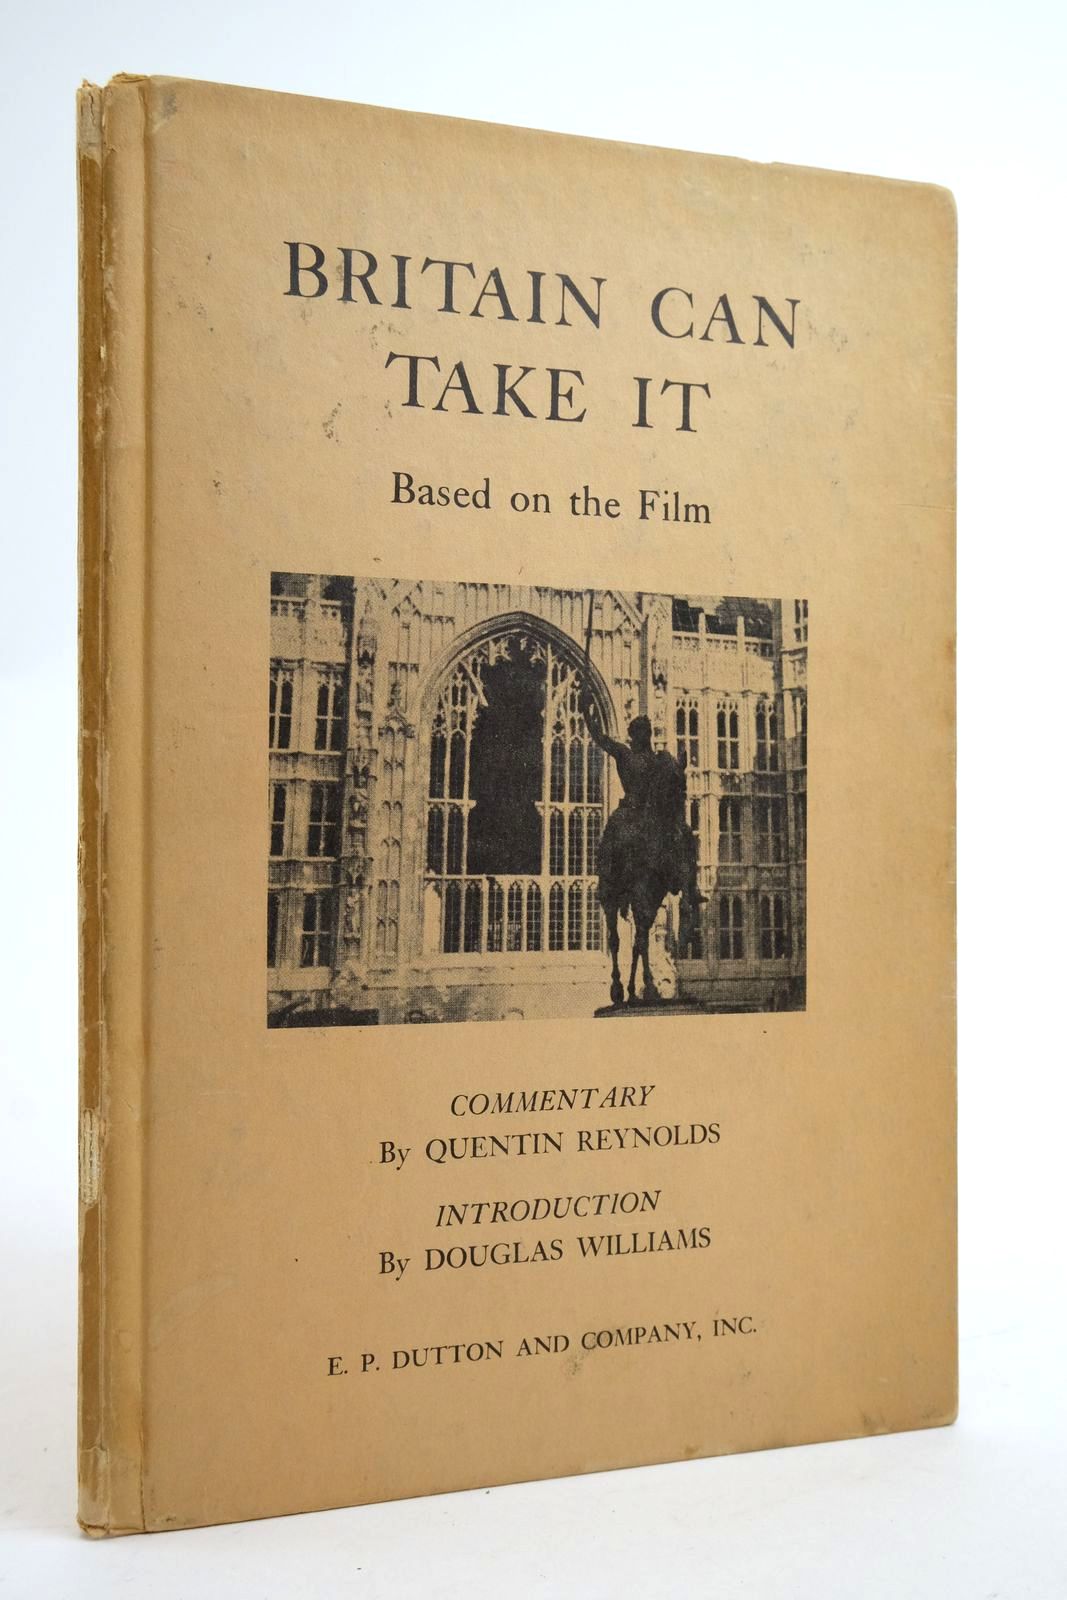 Photo of BRITAIN CAN TAKE IT written by Reynolds, Quentin Williams, Douglas published by E.P. Dutton &amp; Company Inc. (STOCK CODE: 2135884)  for sale by Stella & Rose's Books